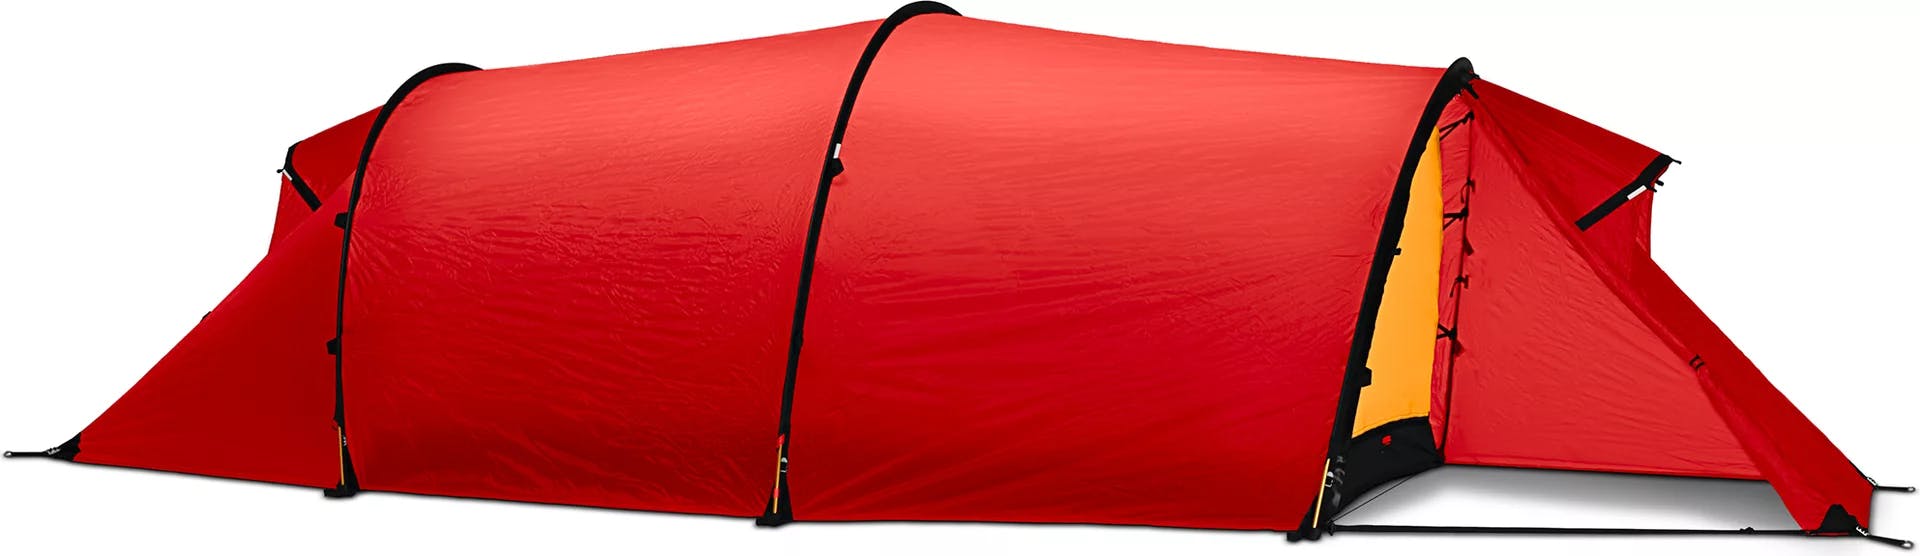 Top 7 Hilleberg Tents of 2023 | Curated.com